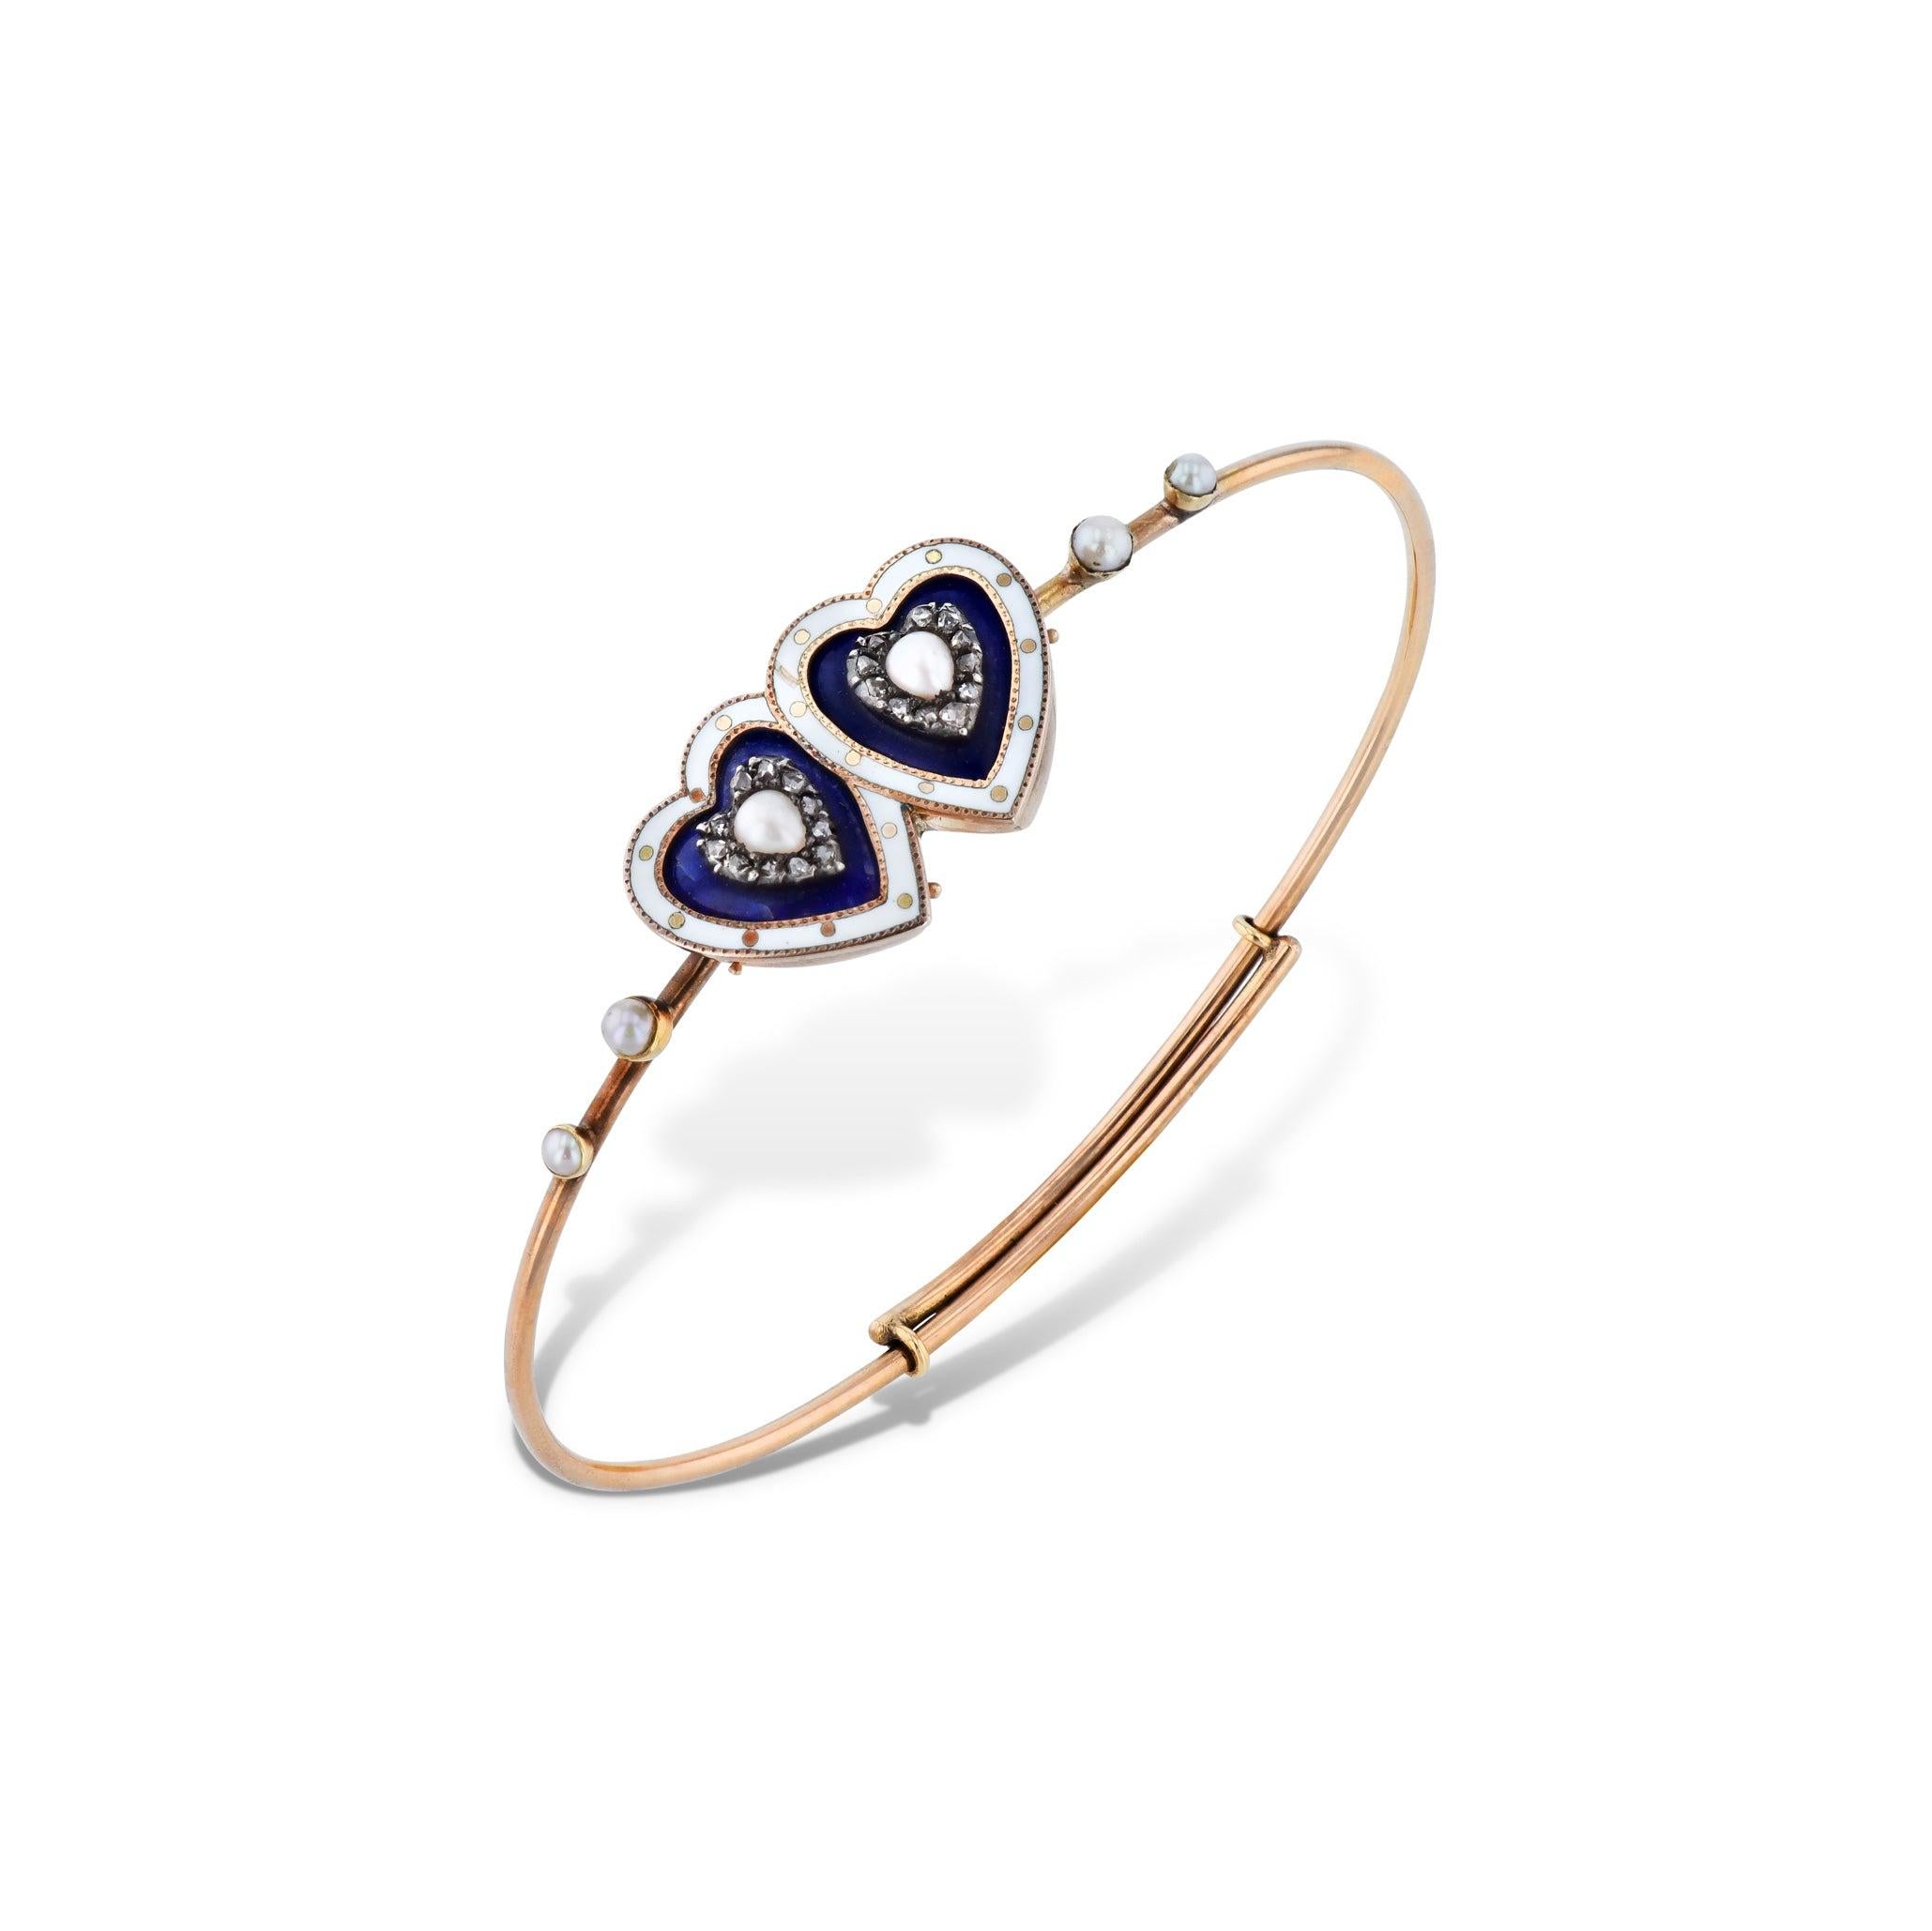 A magnificent combination of 14kt gold, 22 stunning rose cut diamonds, delicate blue and white enamel embellishments, and 6 alluring natural seed pearls make the Victorian Gold Twin Hearts Diamond Estate Bracelet a stunning addition to any jewelry